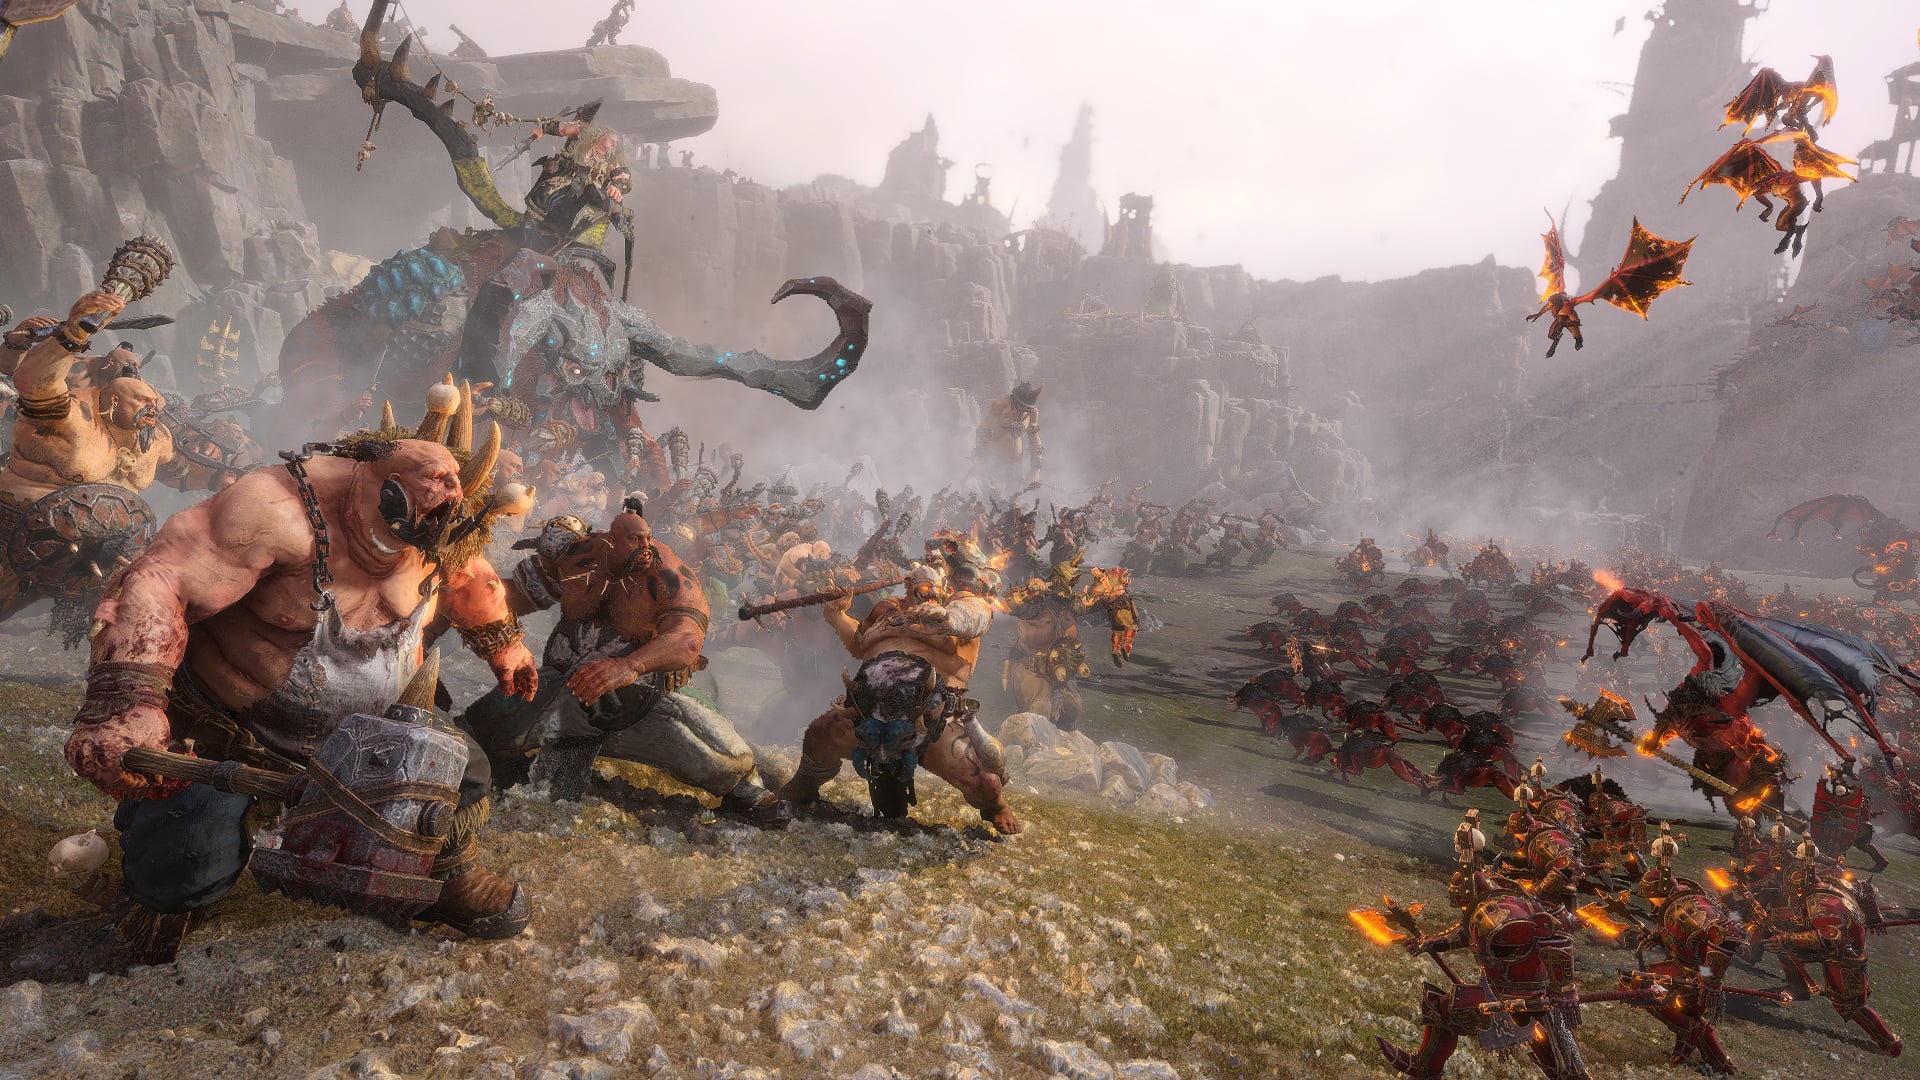 Total War: Warhammer III launches February 17, 2022, to Xbox Game Pass on day one - Gematsu